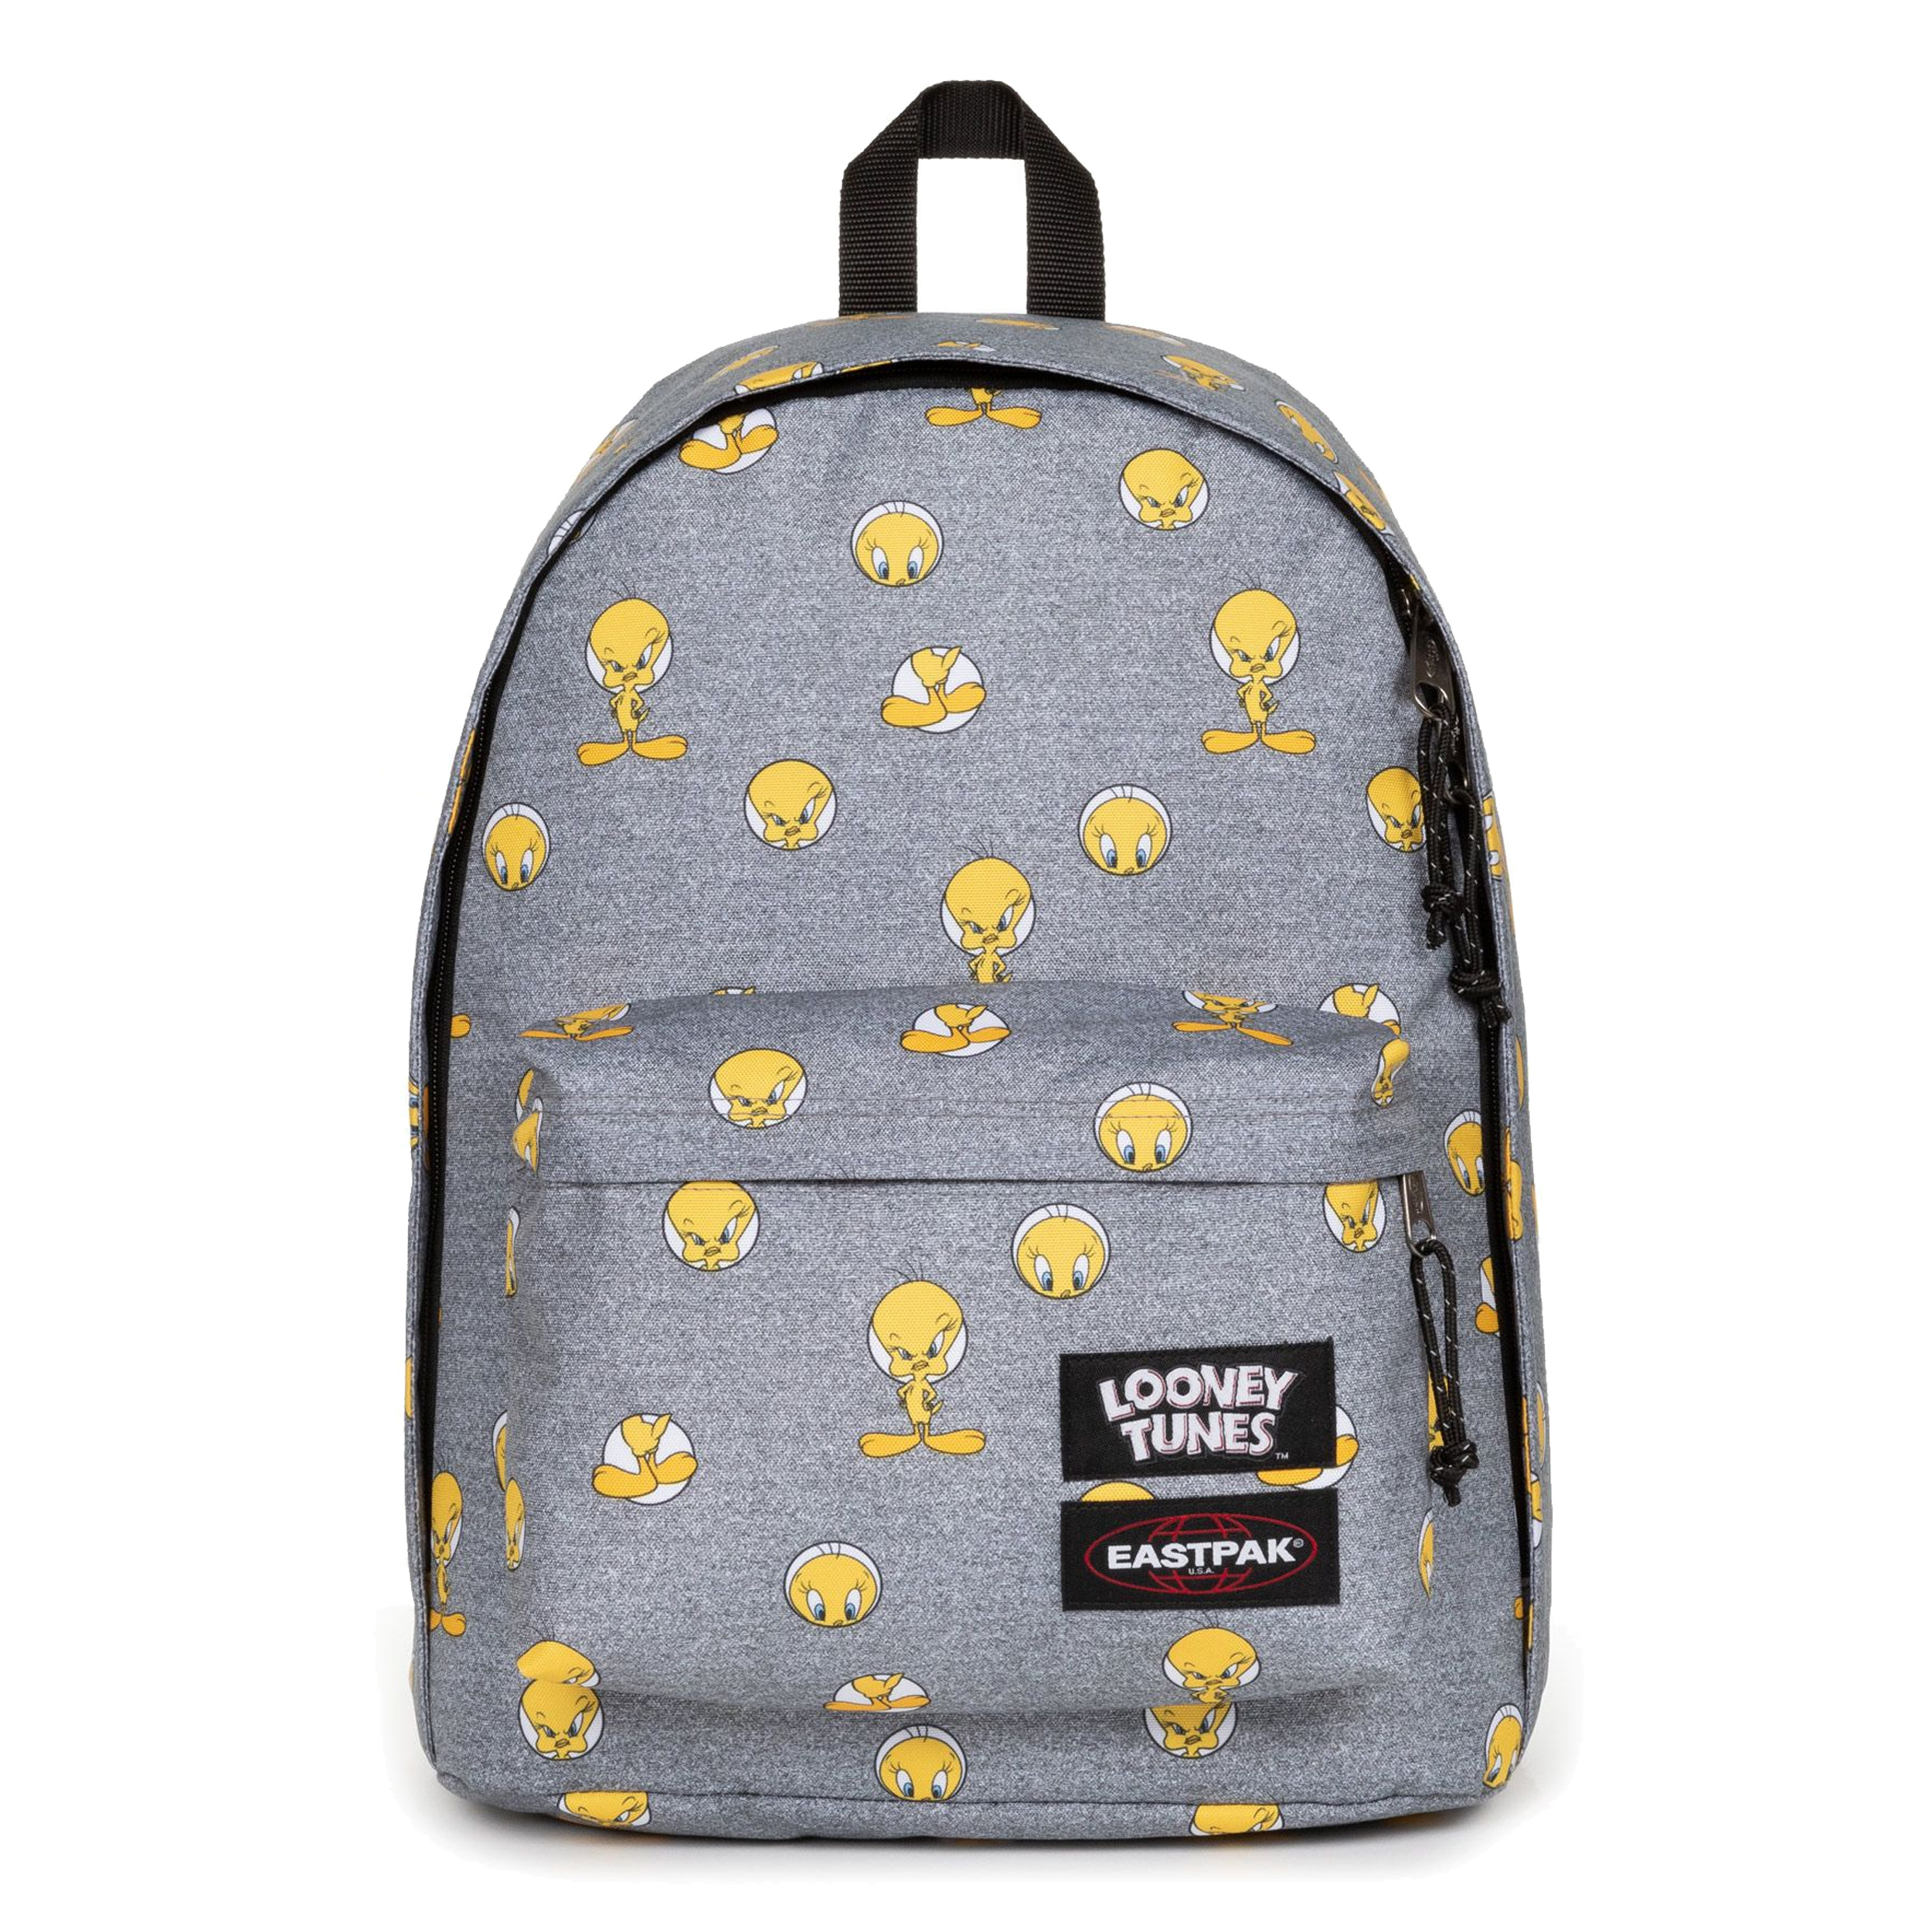 Sac à dos 27L Out of Office Looney Tunes Eastpak tweety grey avant